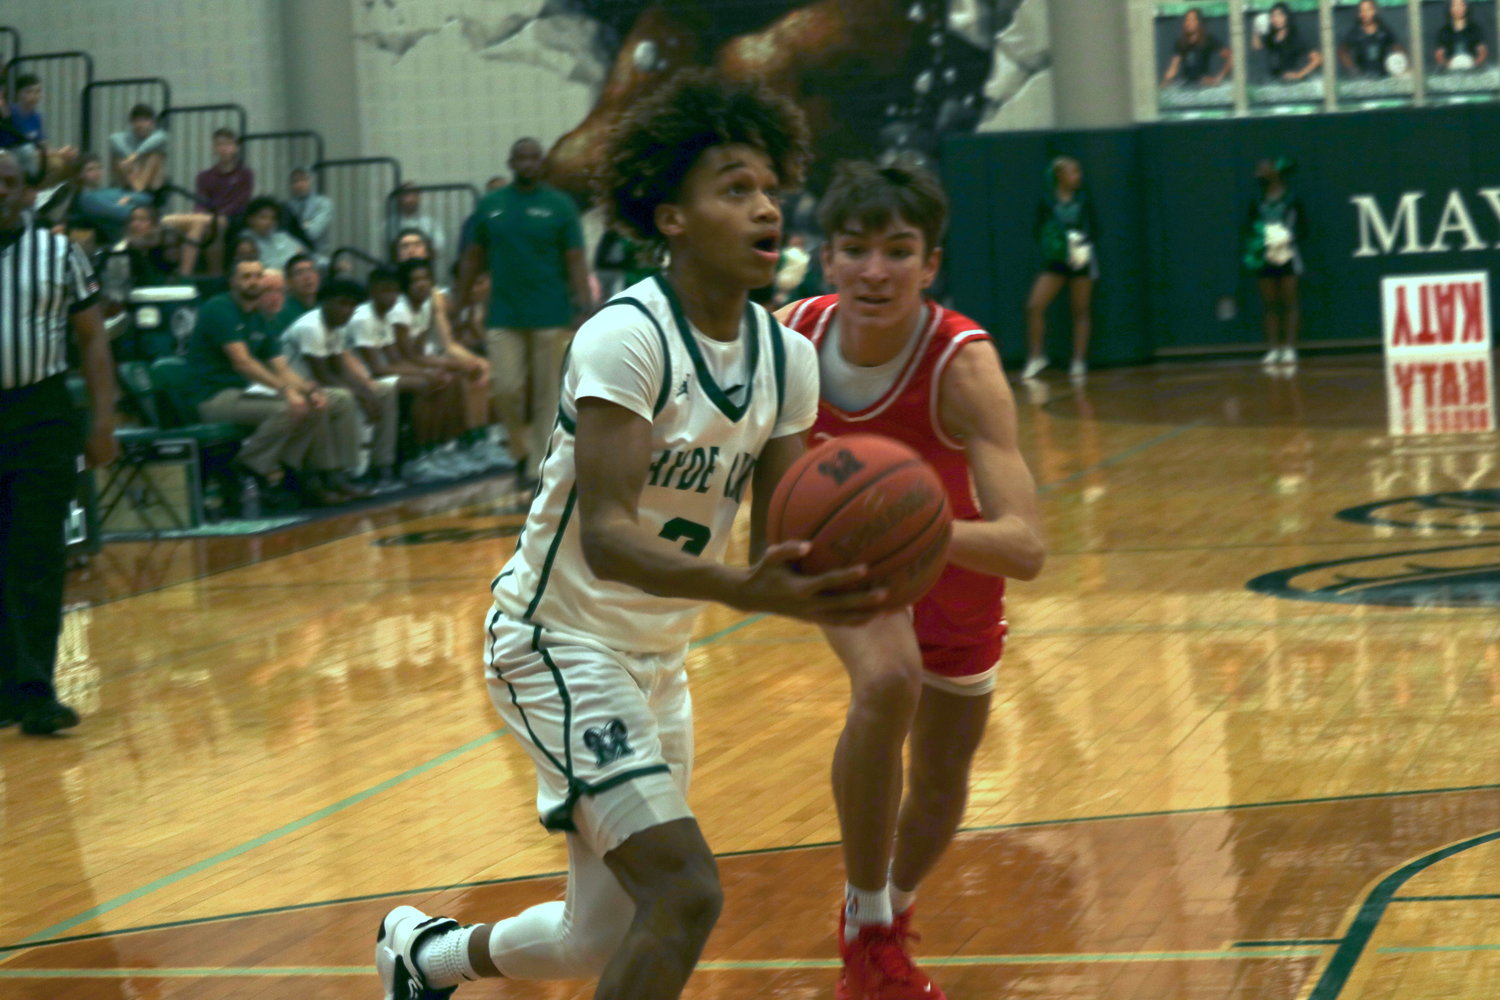 Mayde Creek’s Christian Jones shoots a layup defend during Wednesday’s game at the Mayde Creek gym.